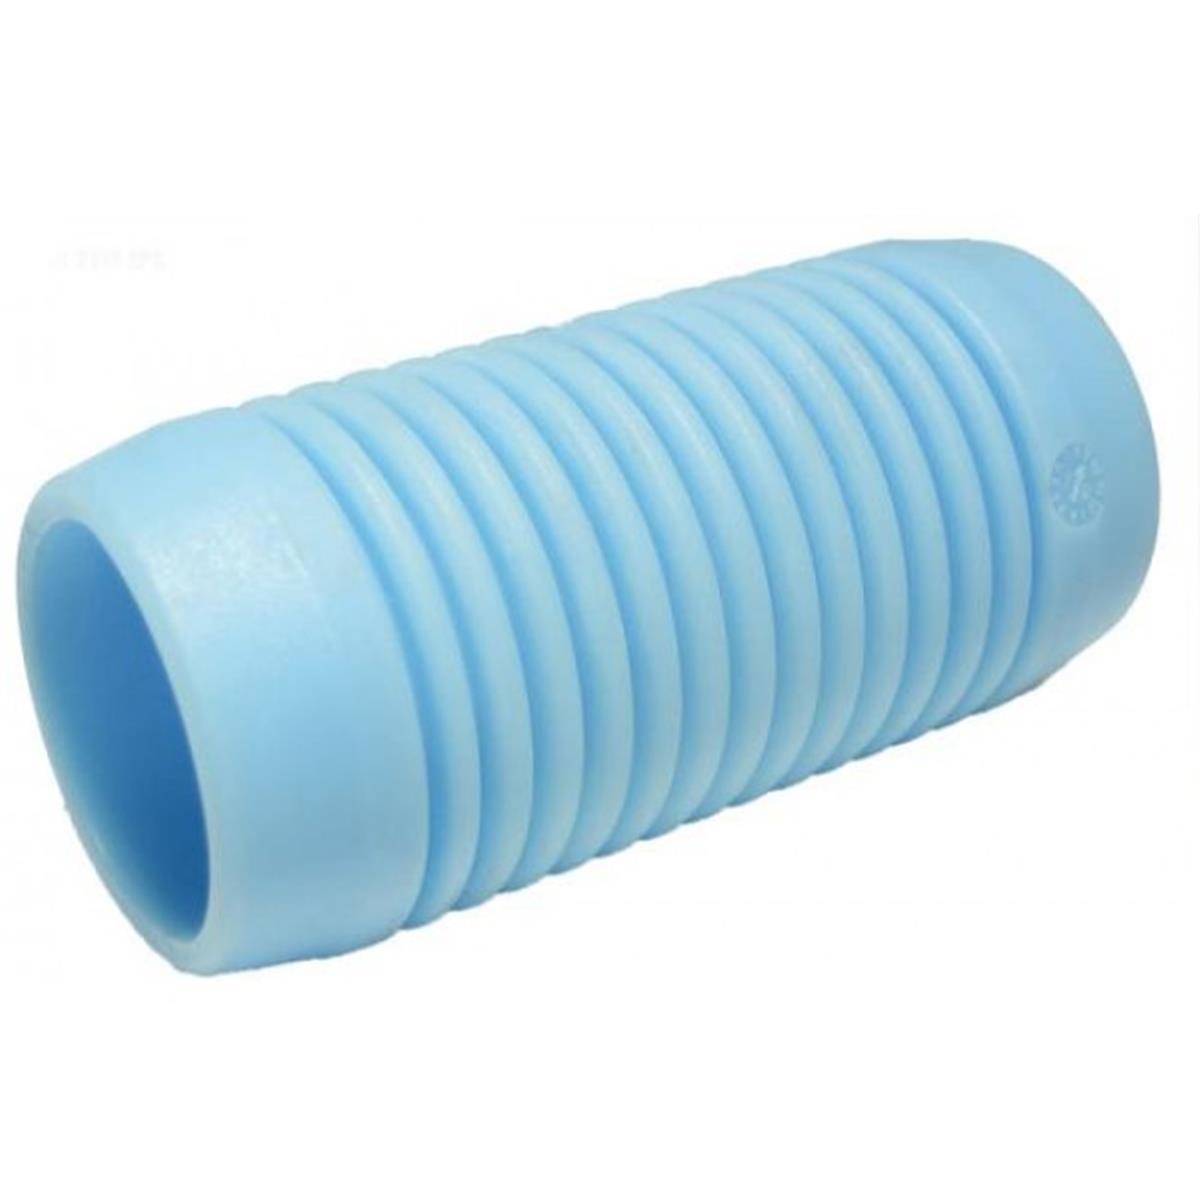 UPC 718705000019 product image for Pentair Water Pool & Spa KK21241B 4 in. Female Hose Connector - Blue | upcitemdb.com